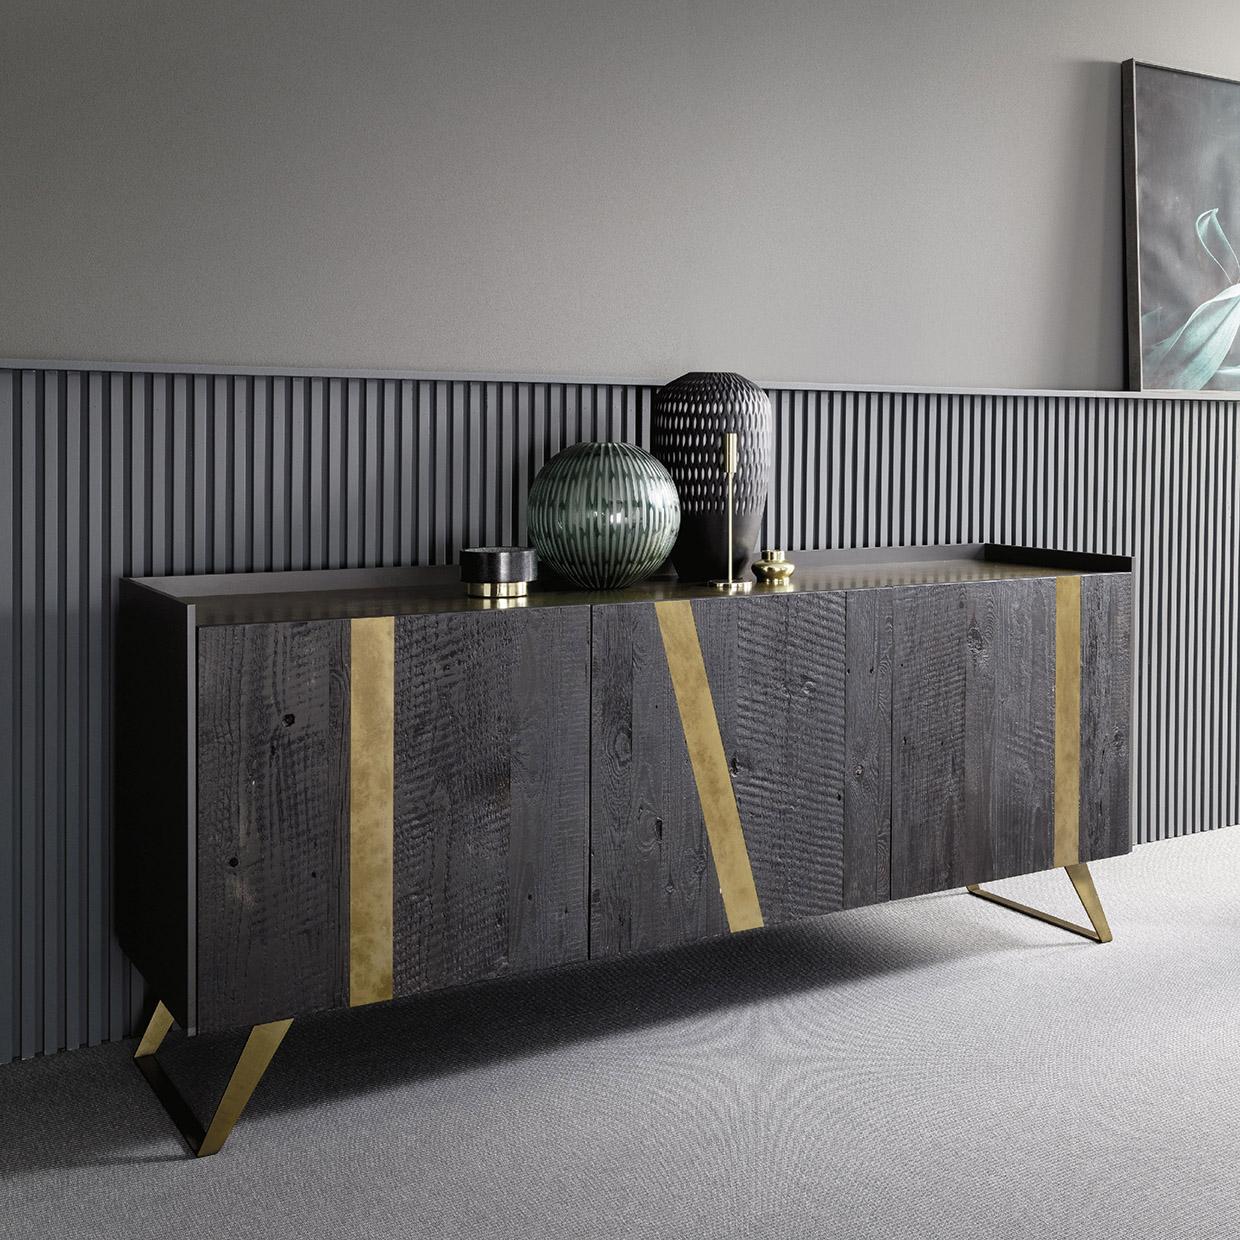 Elly is a contemporary sideboard that merges an essential design with bold Italian craftsmanship. Distinctive bronzed metal feet deliver sleek linear modernism to a graphite lacquered body. The charcoal-stained oak doors feature precious inlays in